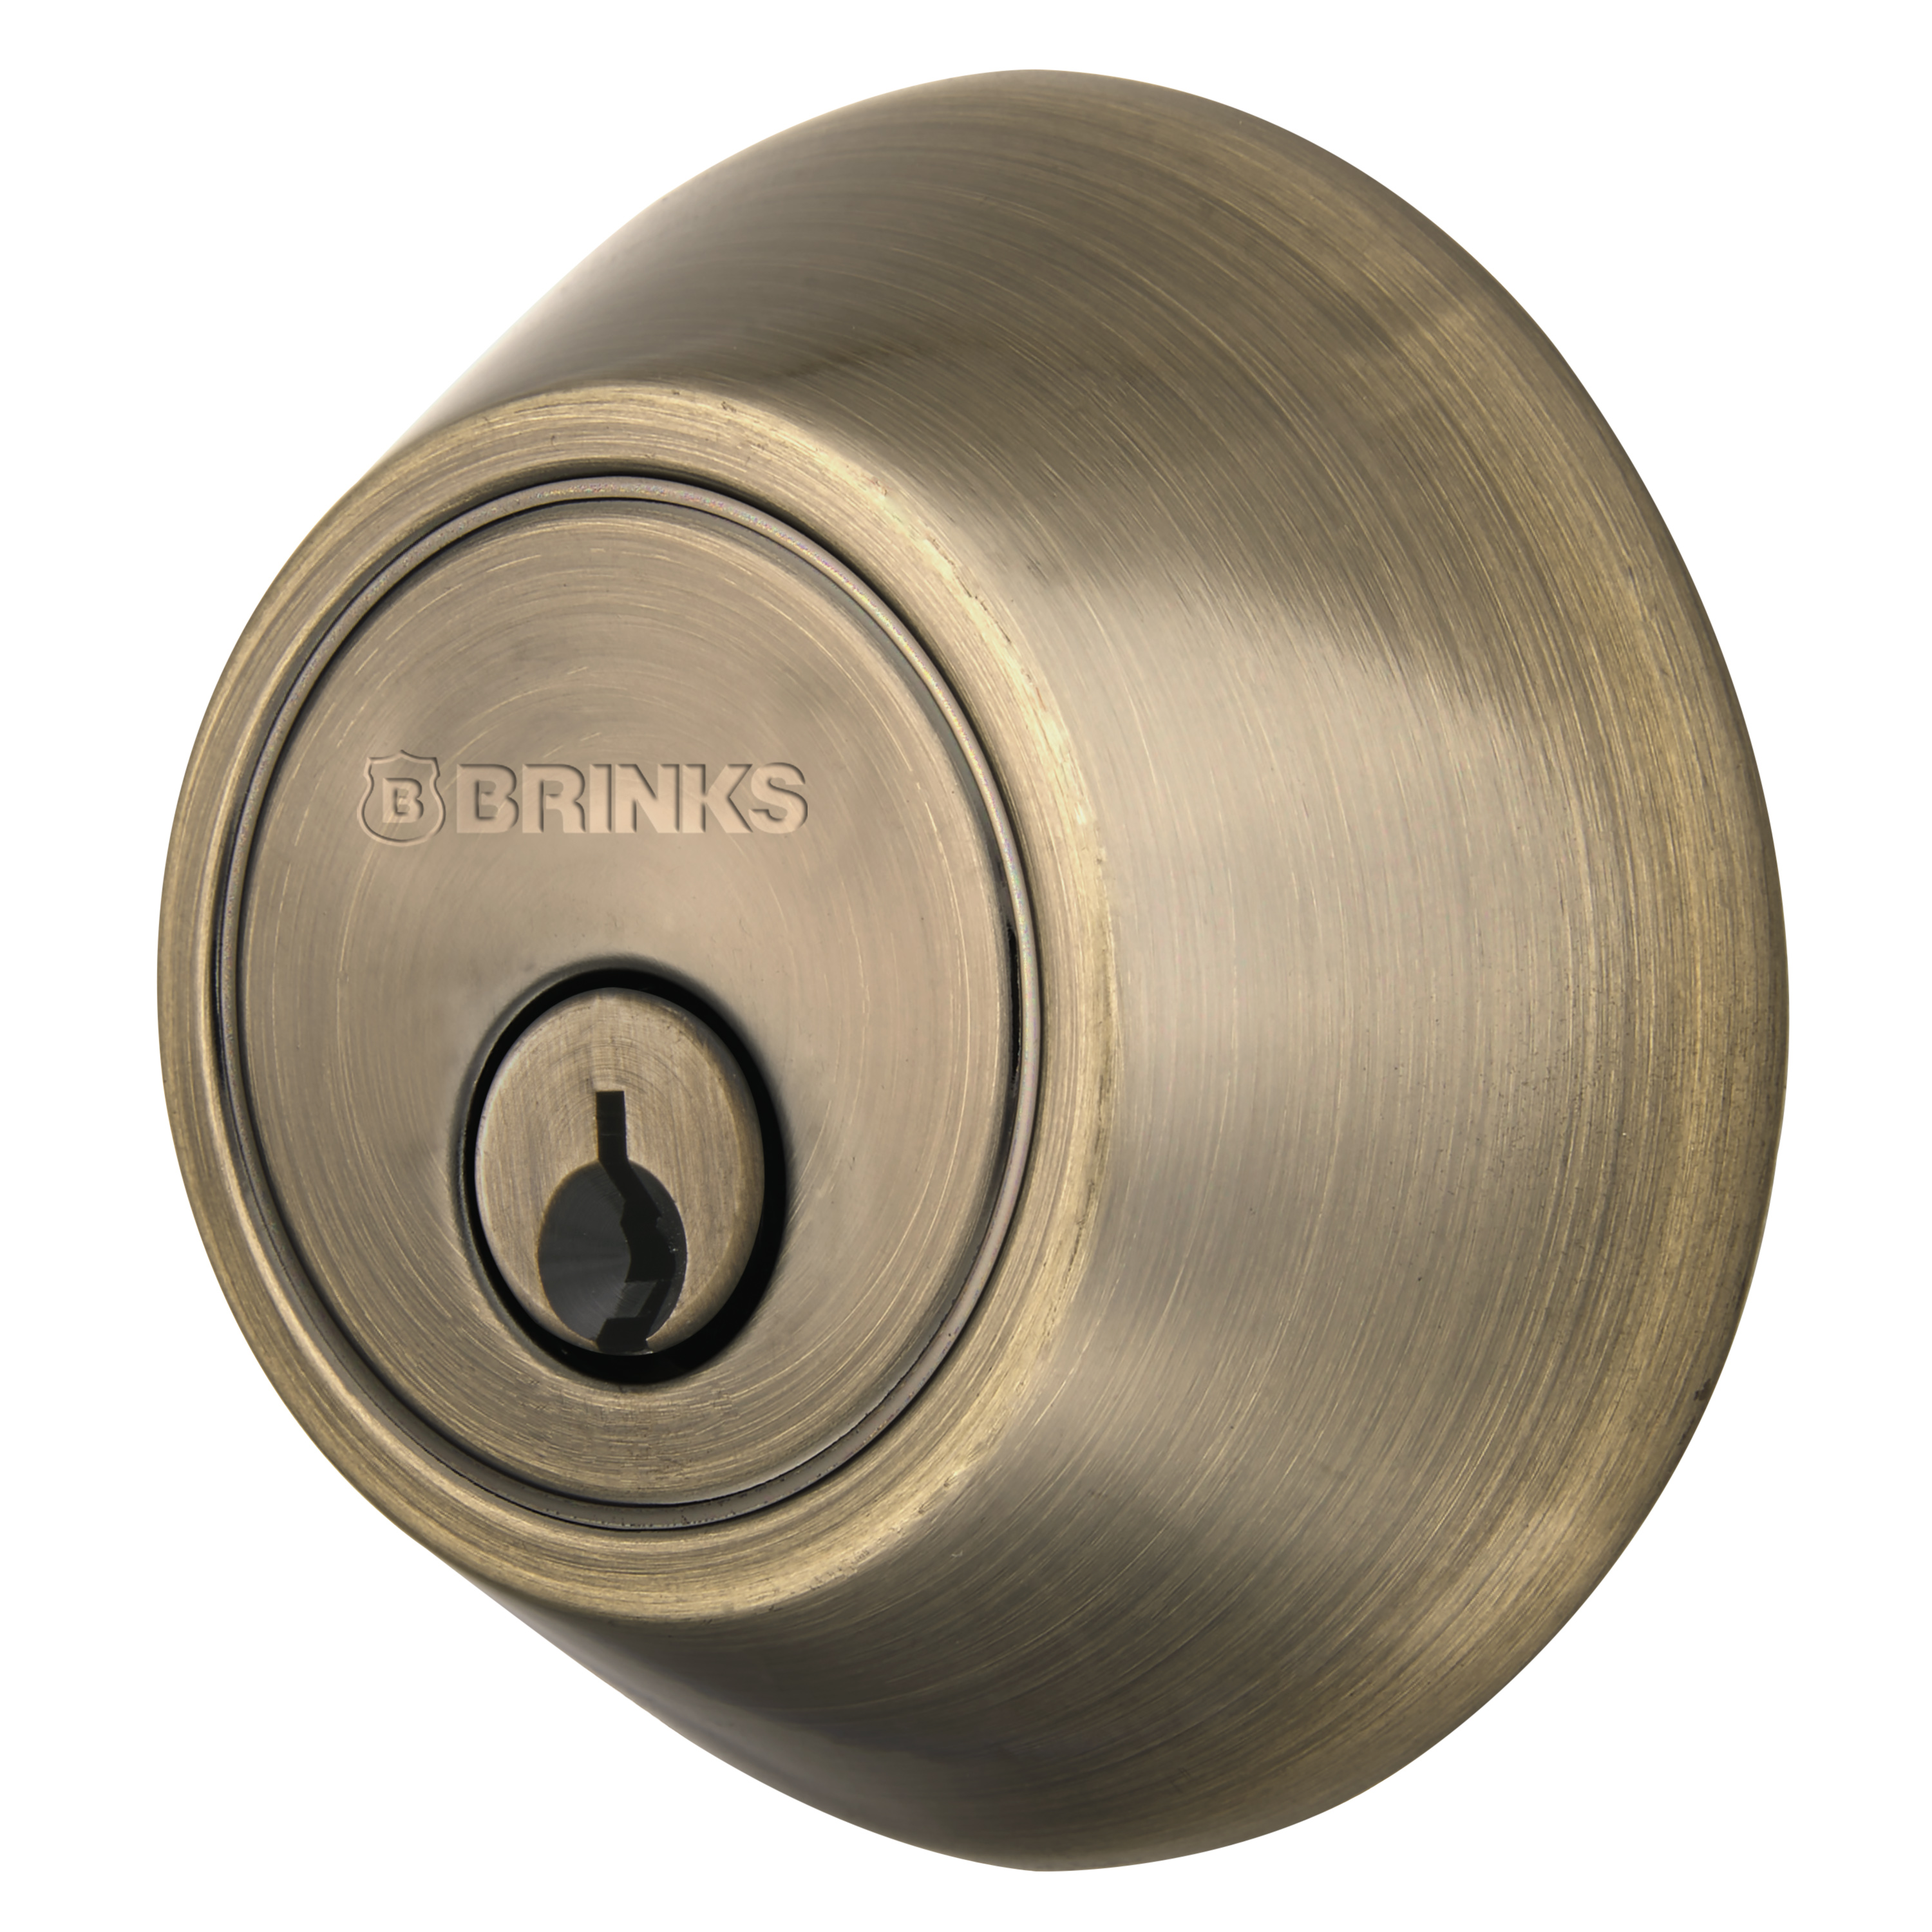 Brinks Keyed Entry Ball Style Doorknob and Deadbolt Combo, Antique Brass Finish, Twin Pack - image 4 of 15